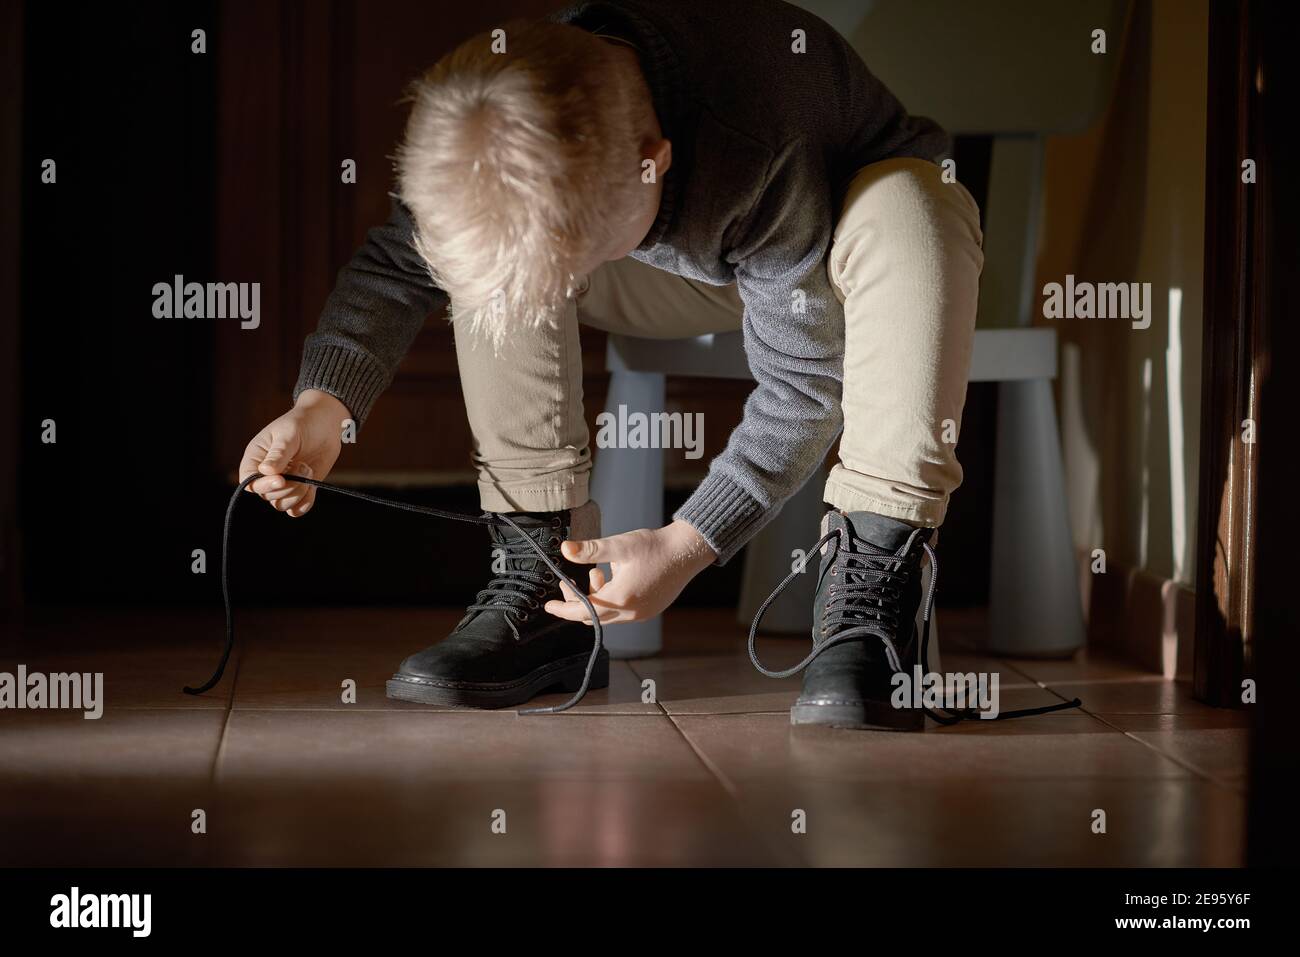 Child tying his shoes before leaving home, selective focus Stock Photo